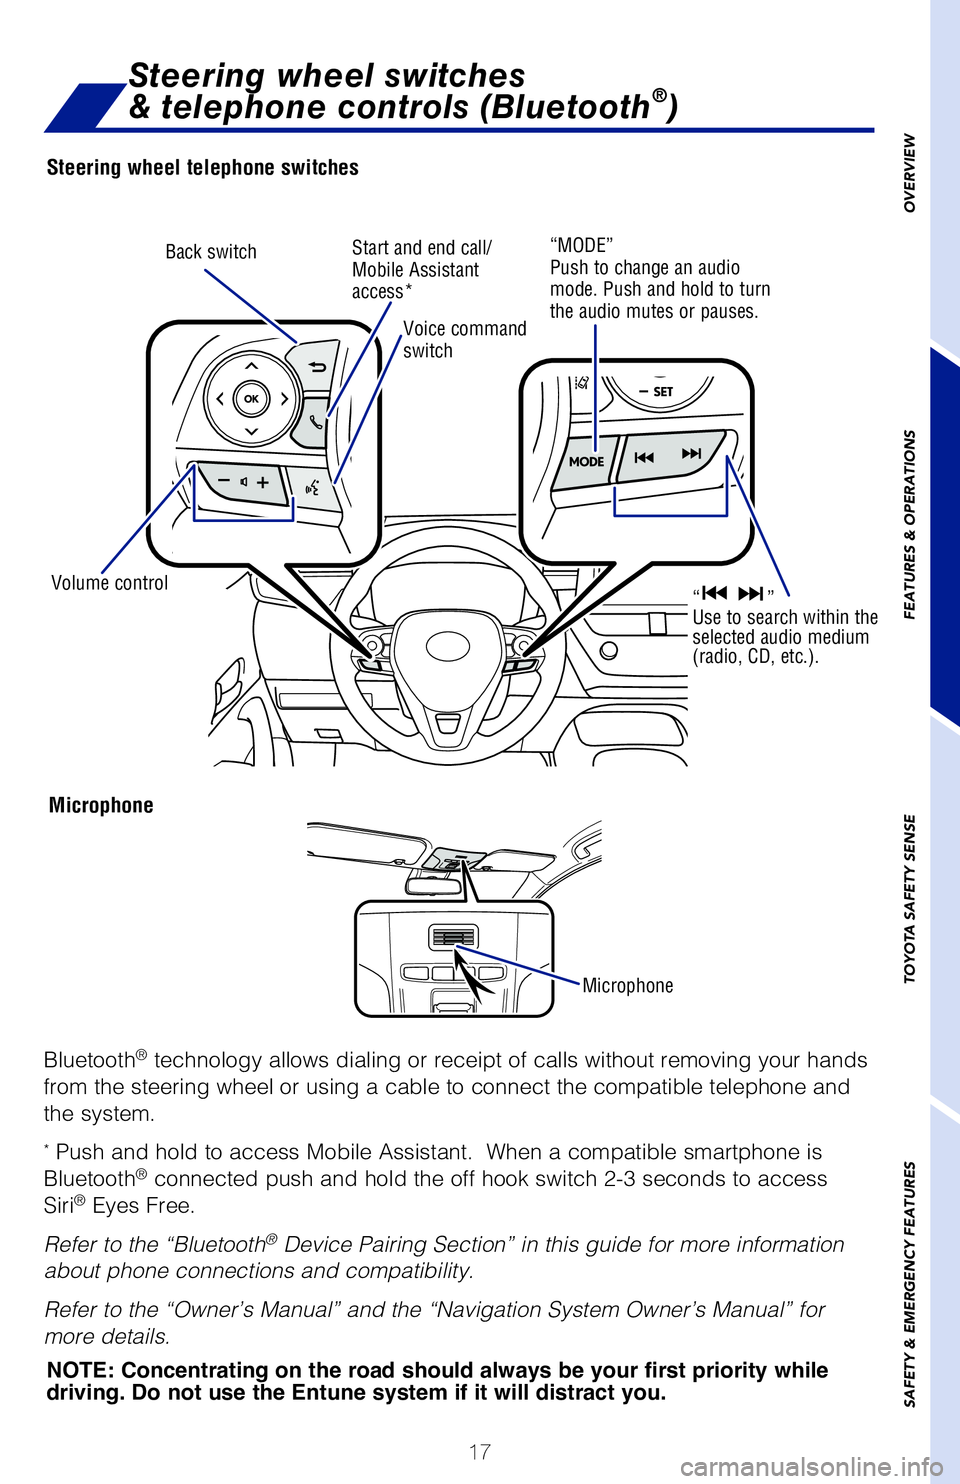 TOYOTA COROLLA HATCHBACK 2019  Owners Manual (in English) 17
OVERVIEW
FEATURES & OPERATIONS
TOYOTA SAFETY SENSE
SAFETY & EMERGENCY FEATURES
Each seatback may be folded separately.
POWER SEAT (DRIVER’S SIDE ONLY)
Seatback angle
Lumbar support
Steering wheel